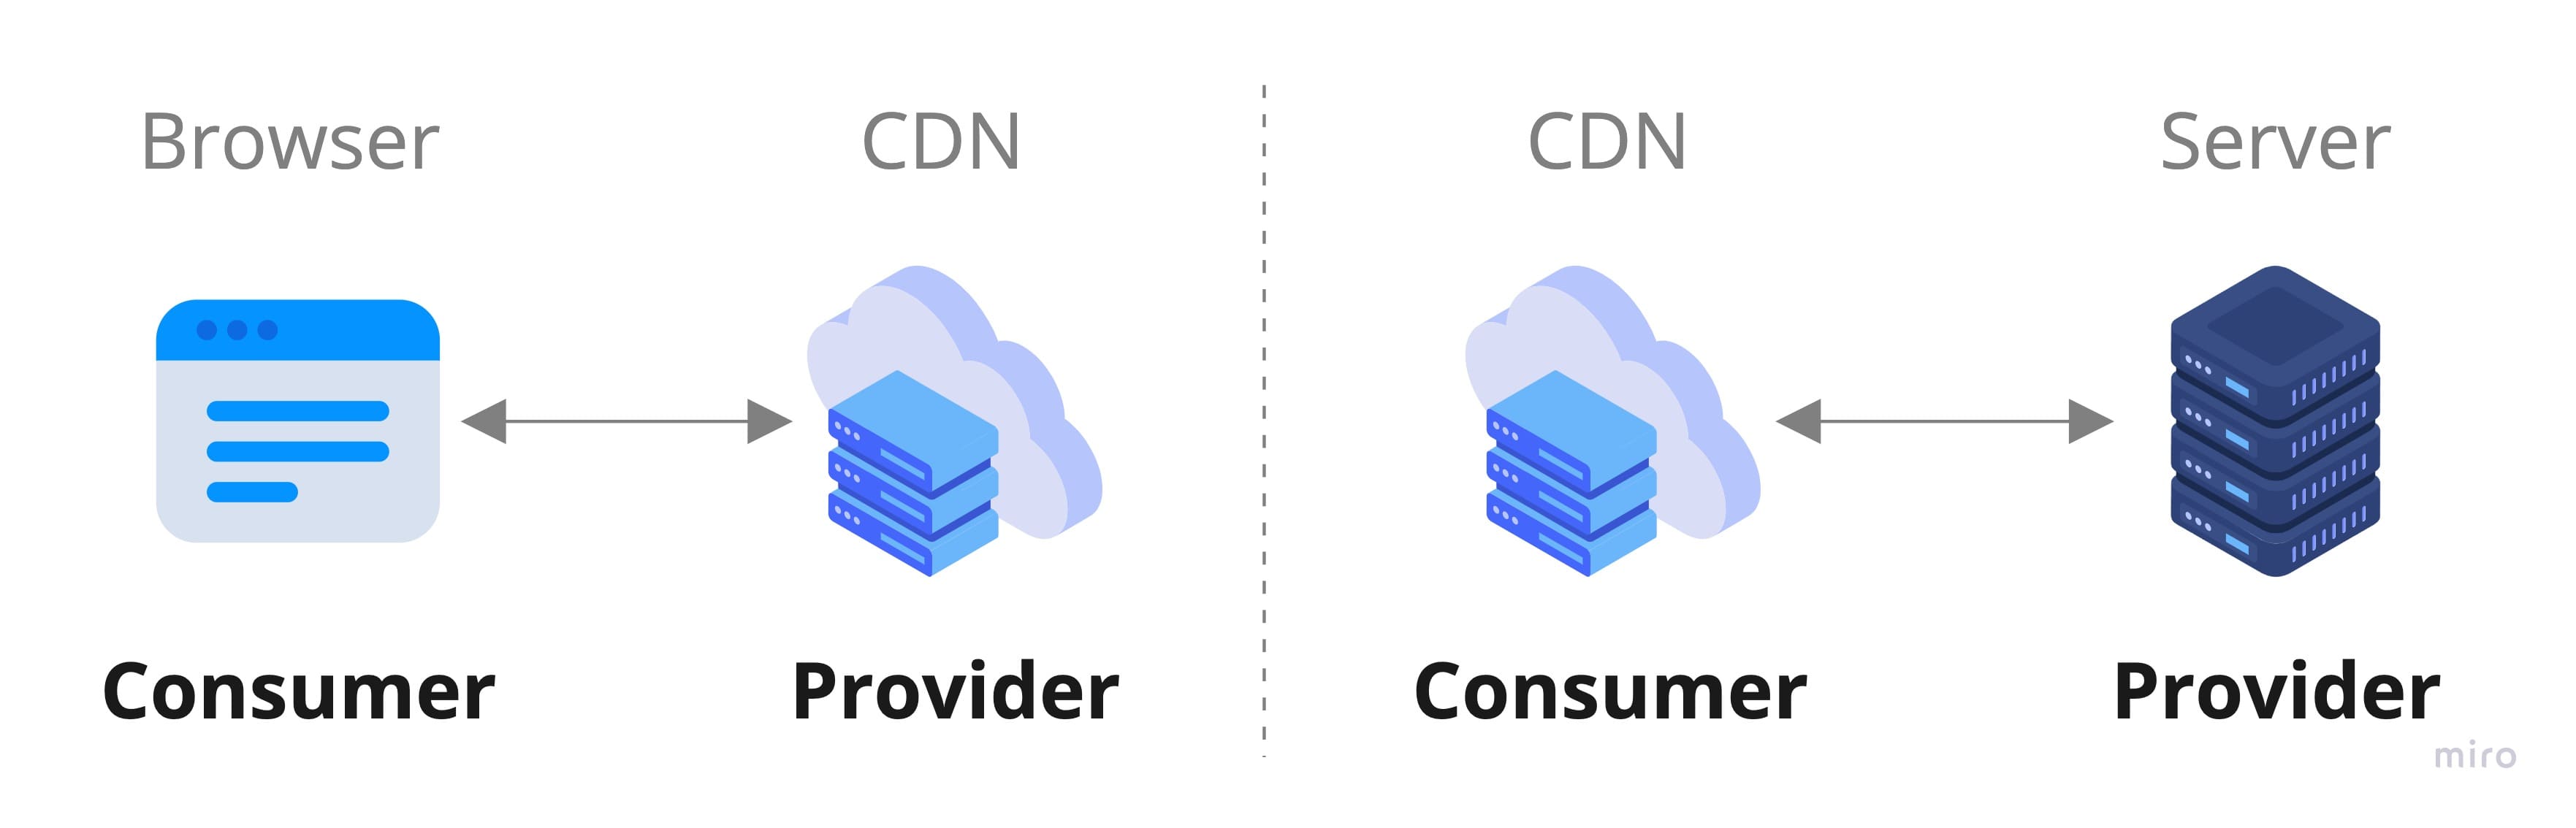 Different roles for CDN